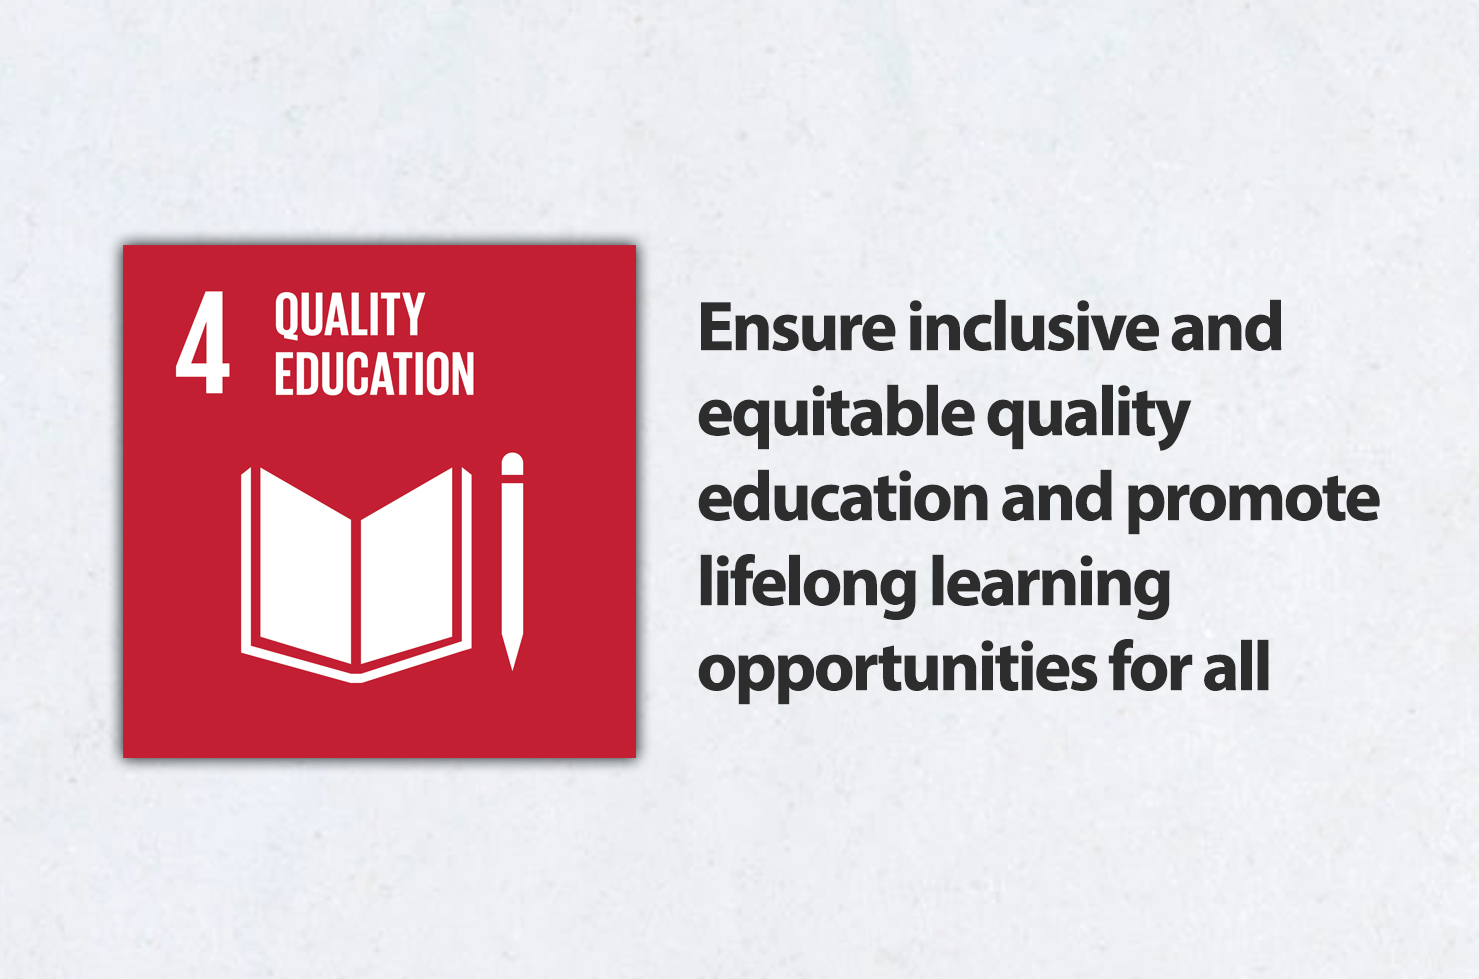 What is SDG 4?